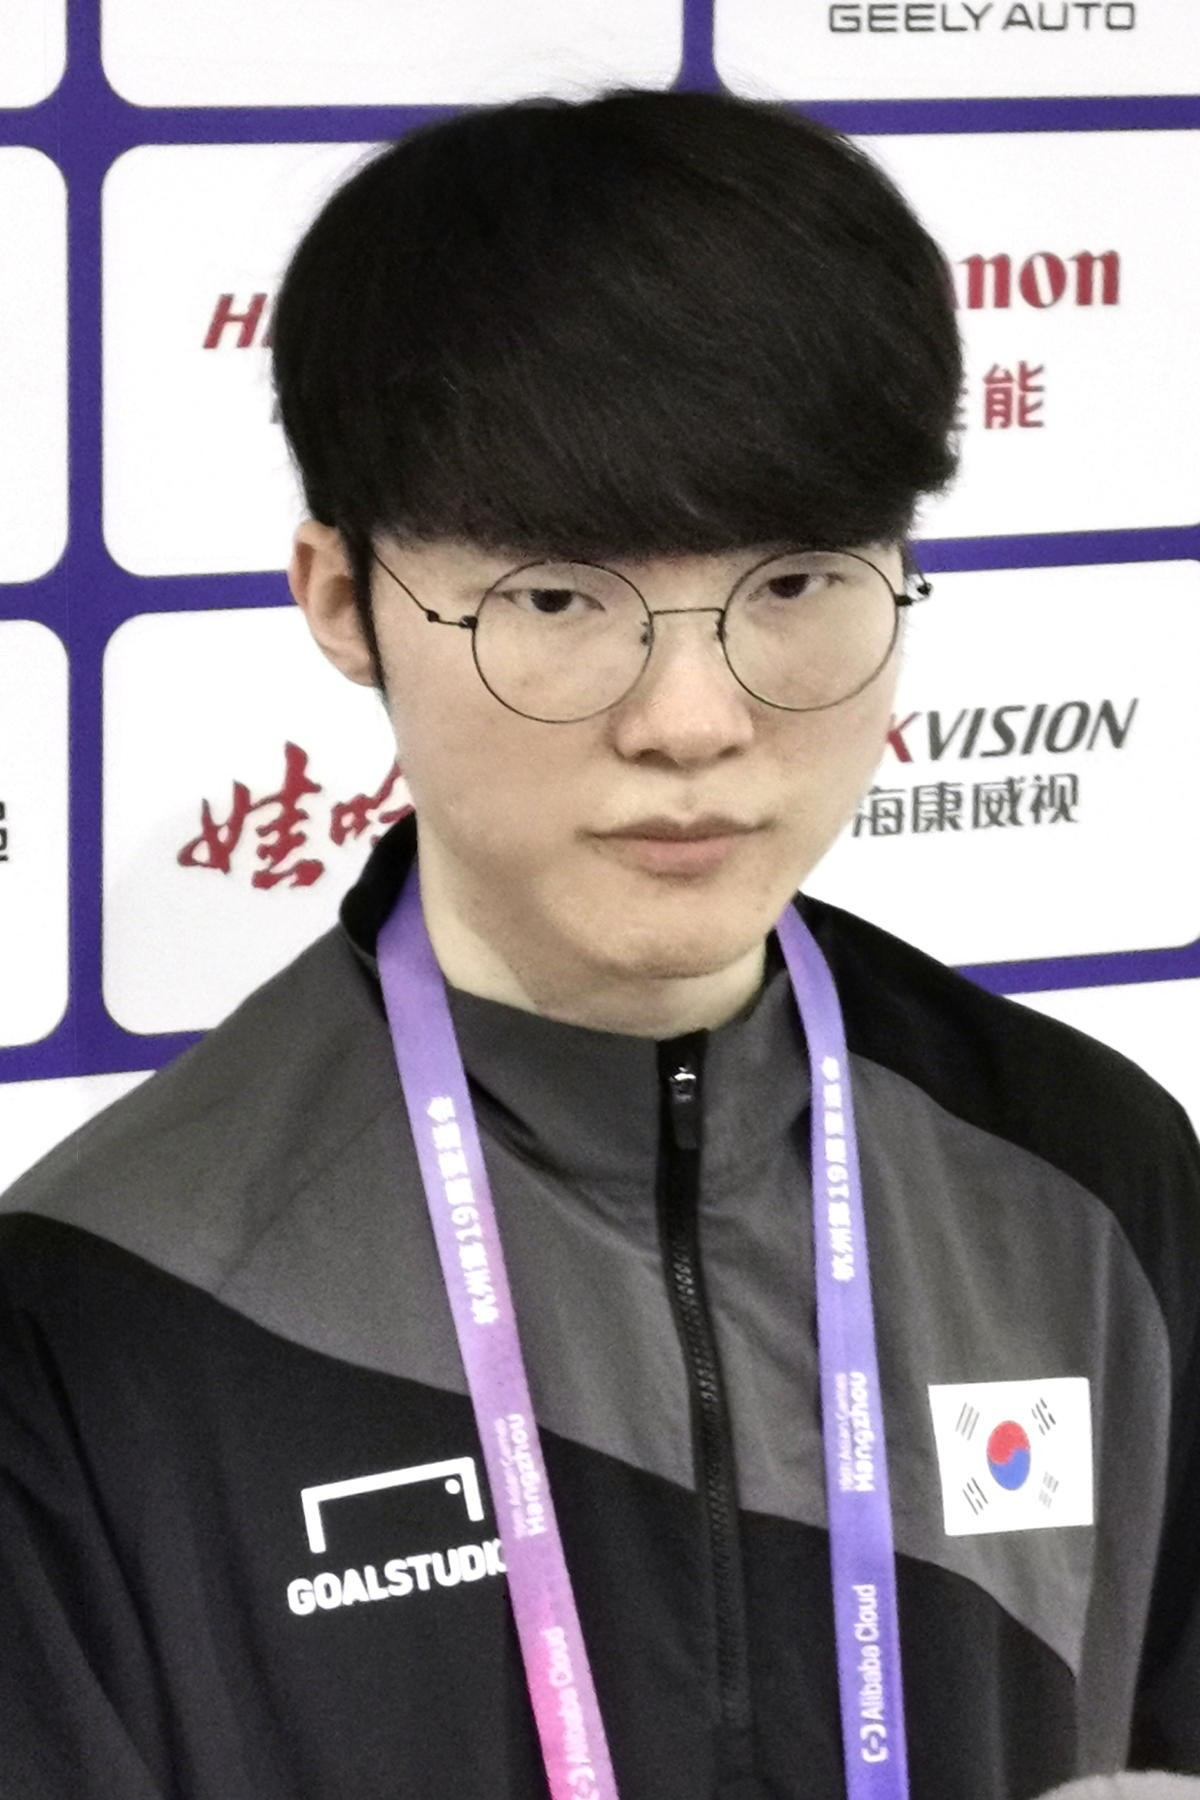 Meet Faker, the 24-year-old who carries an entire sport on his